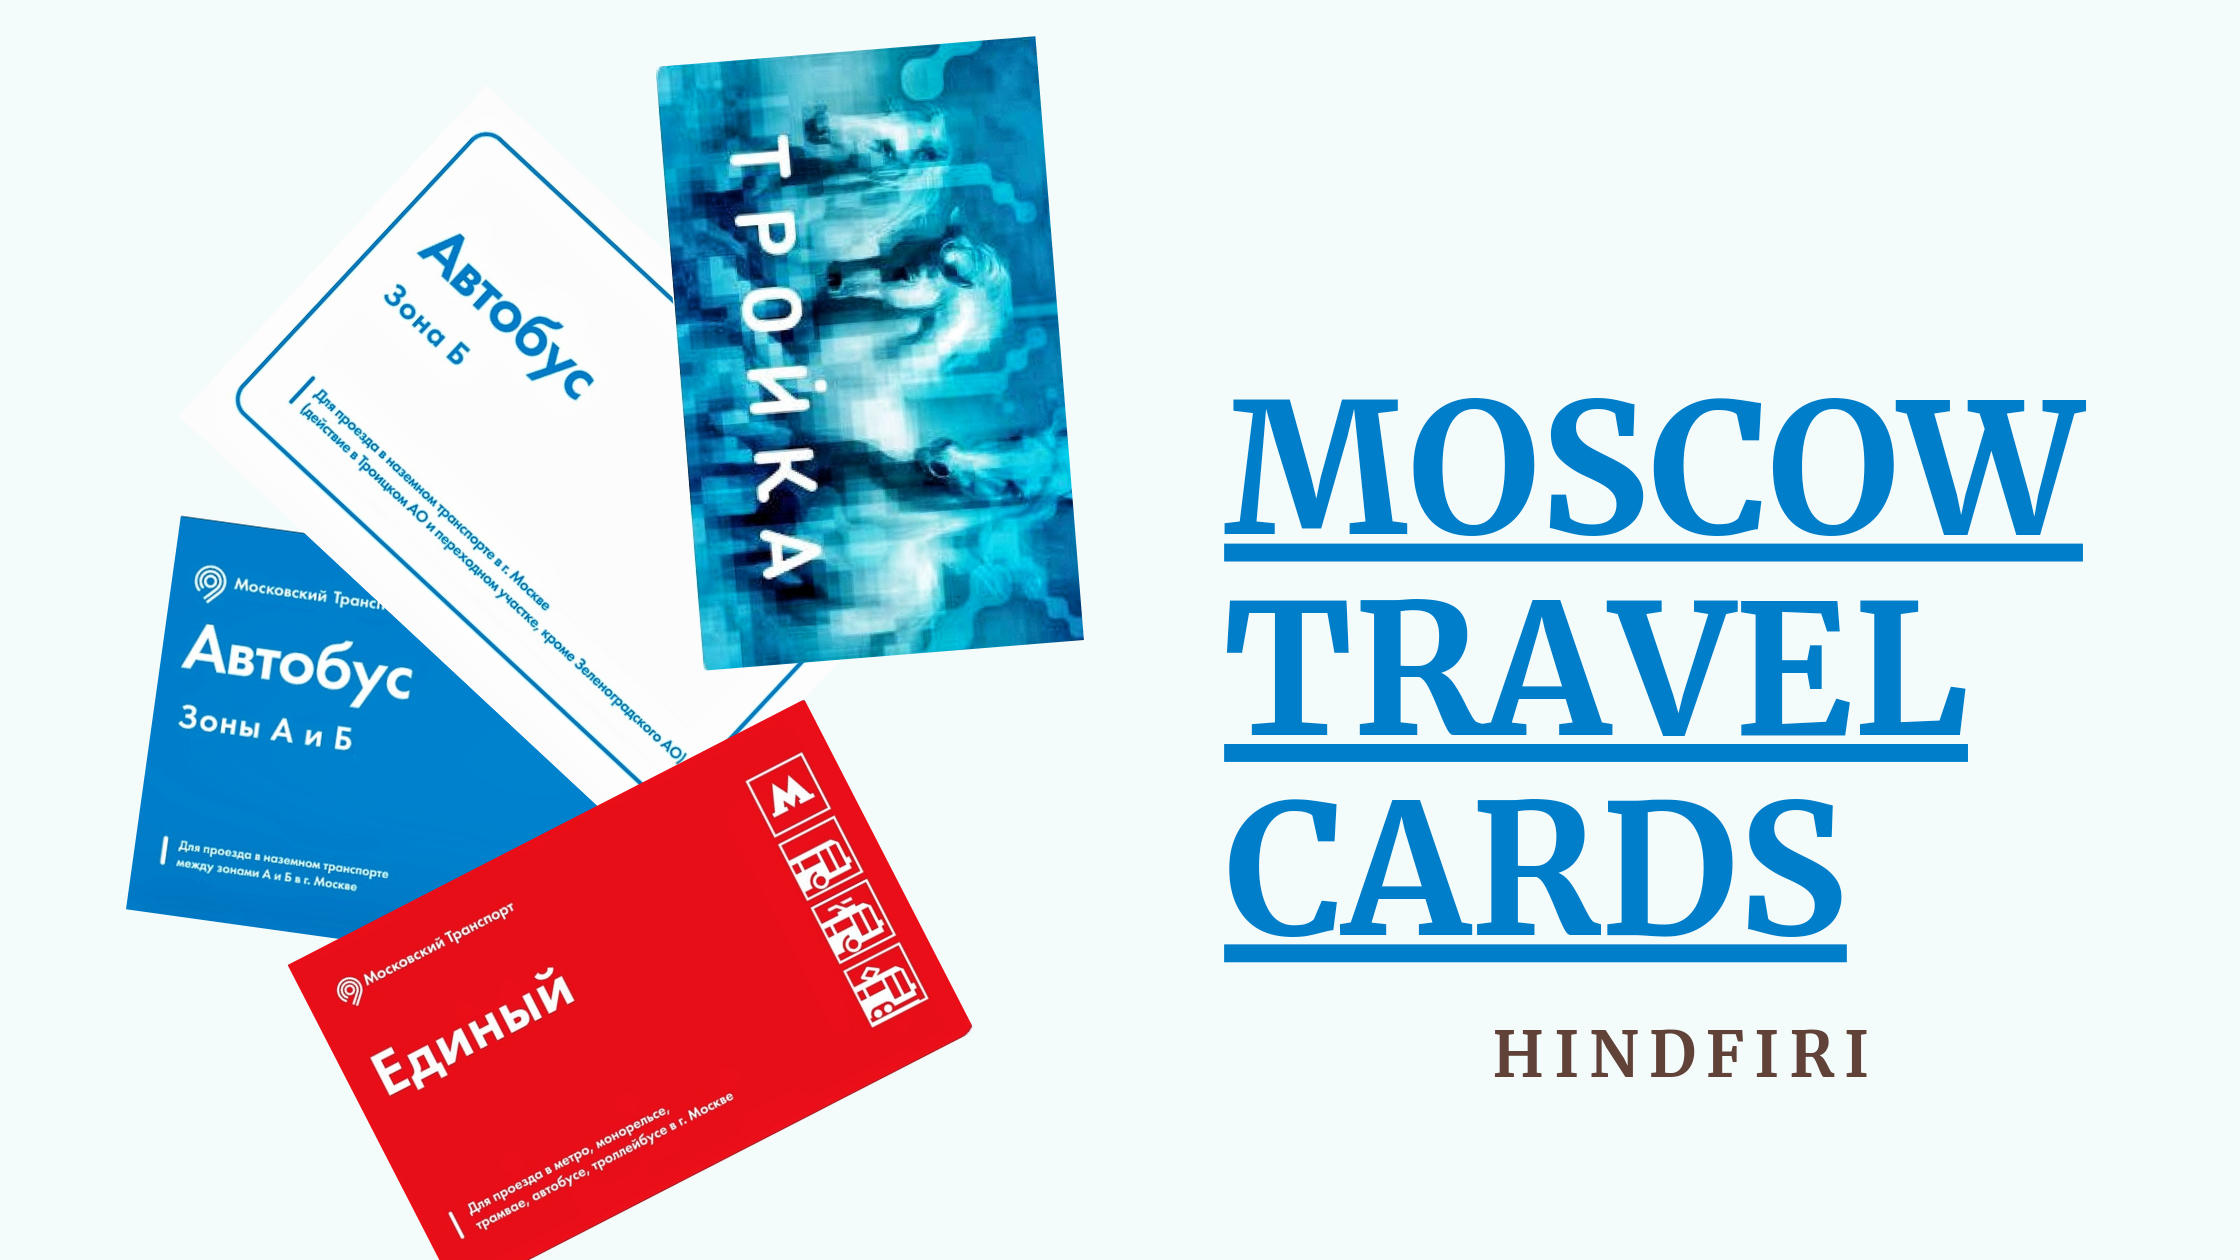 MOSCOW TRAVEL CARDS- TO BUY OR NOT TO BUY?